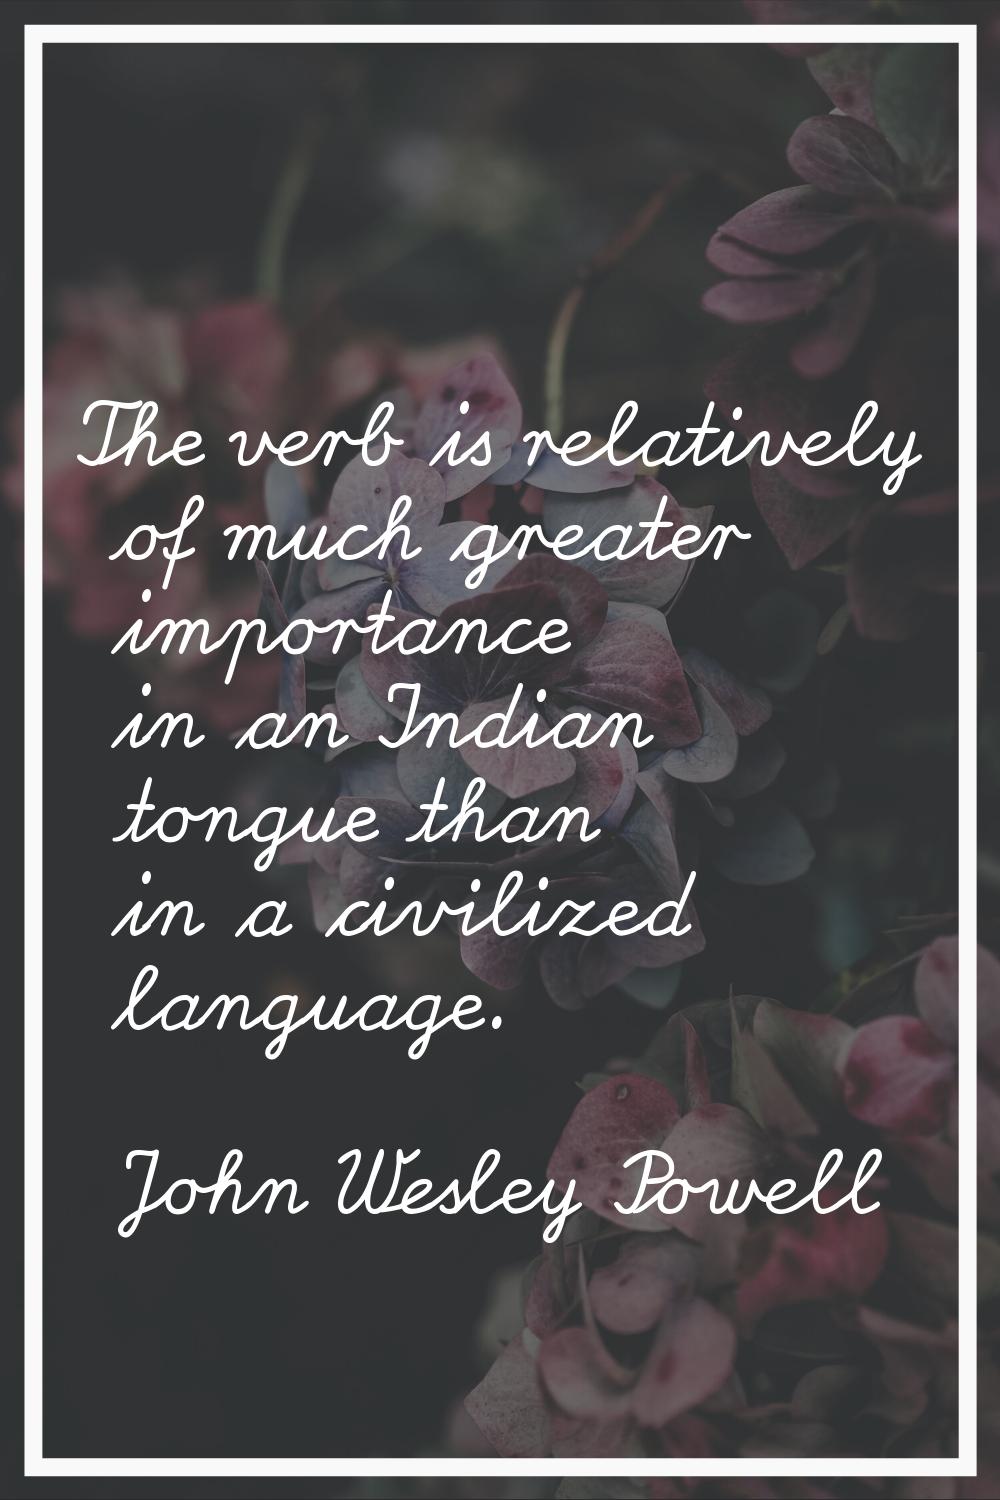 The verb is relatively of much greater importance in an Indian tongue than in a civilized language.